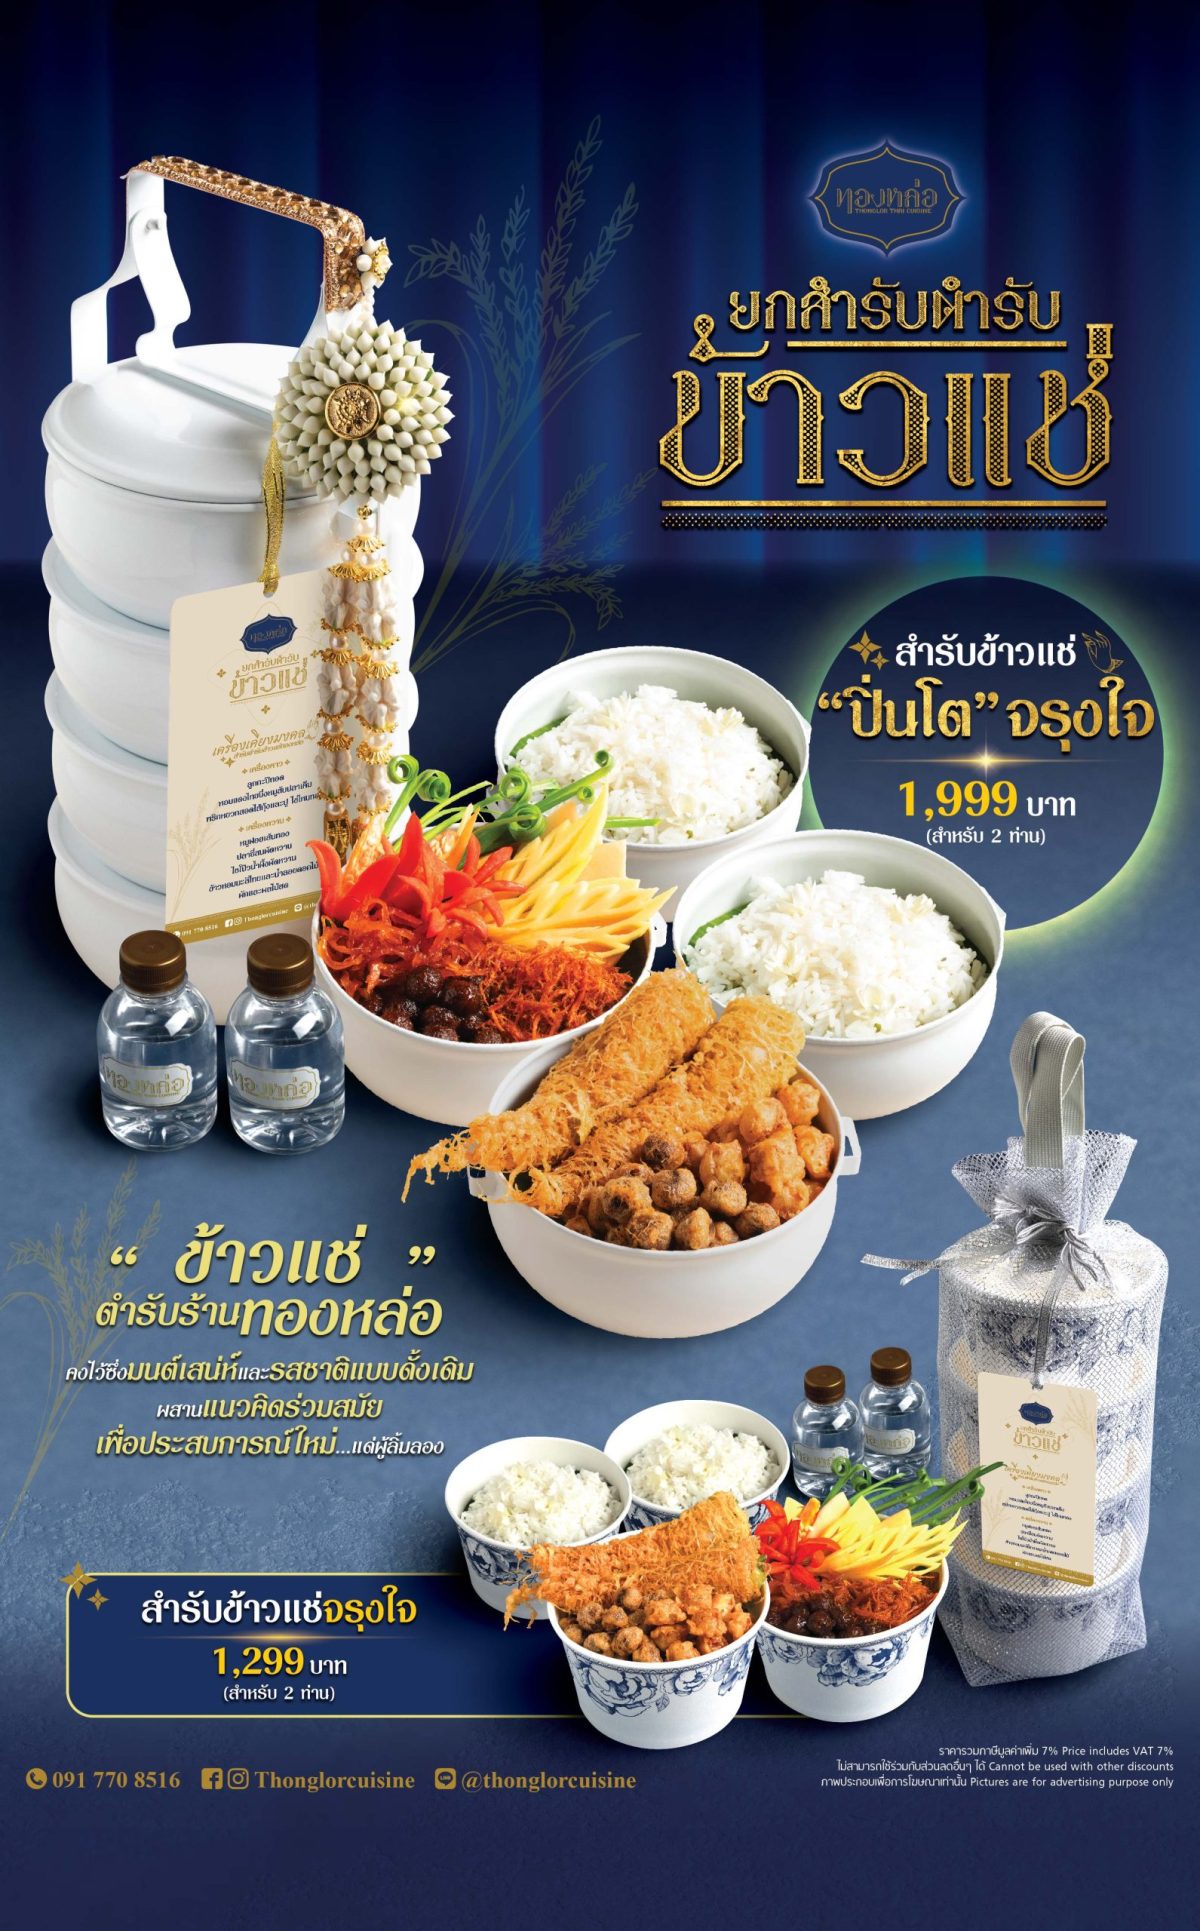 Thonglor Thai Cuisine welcomes summer with refreshing Khao Chae (chilled rice in jasmine-scent water), now available to pre-order for delivery